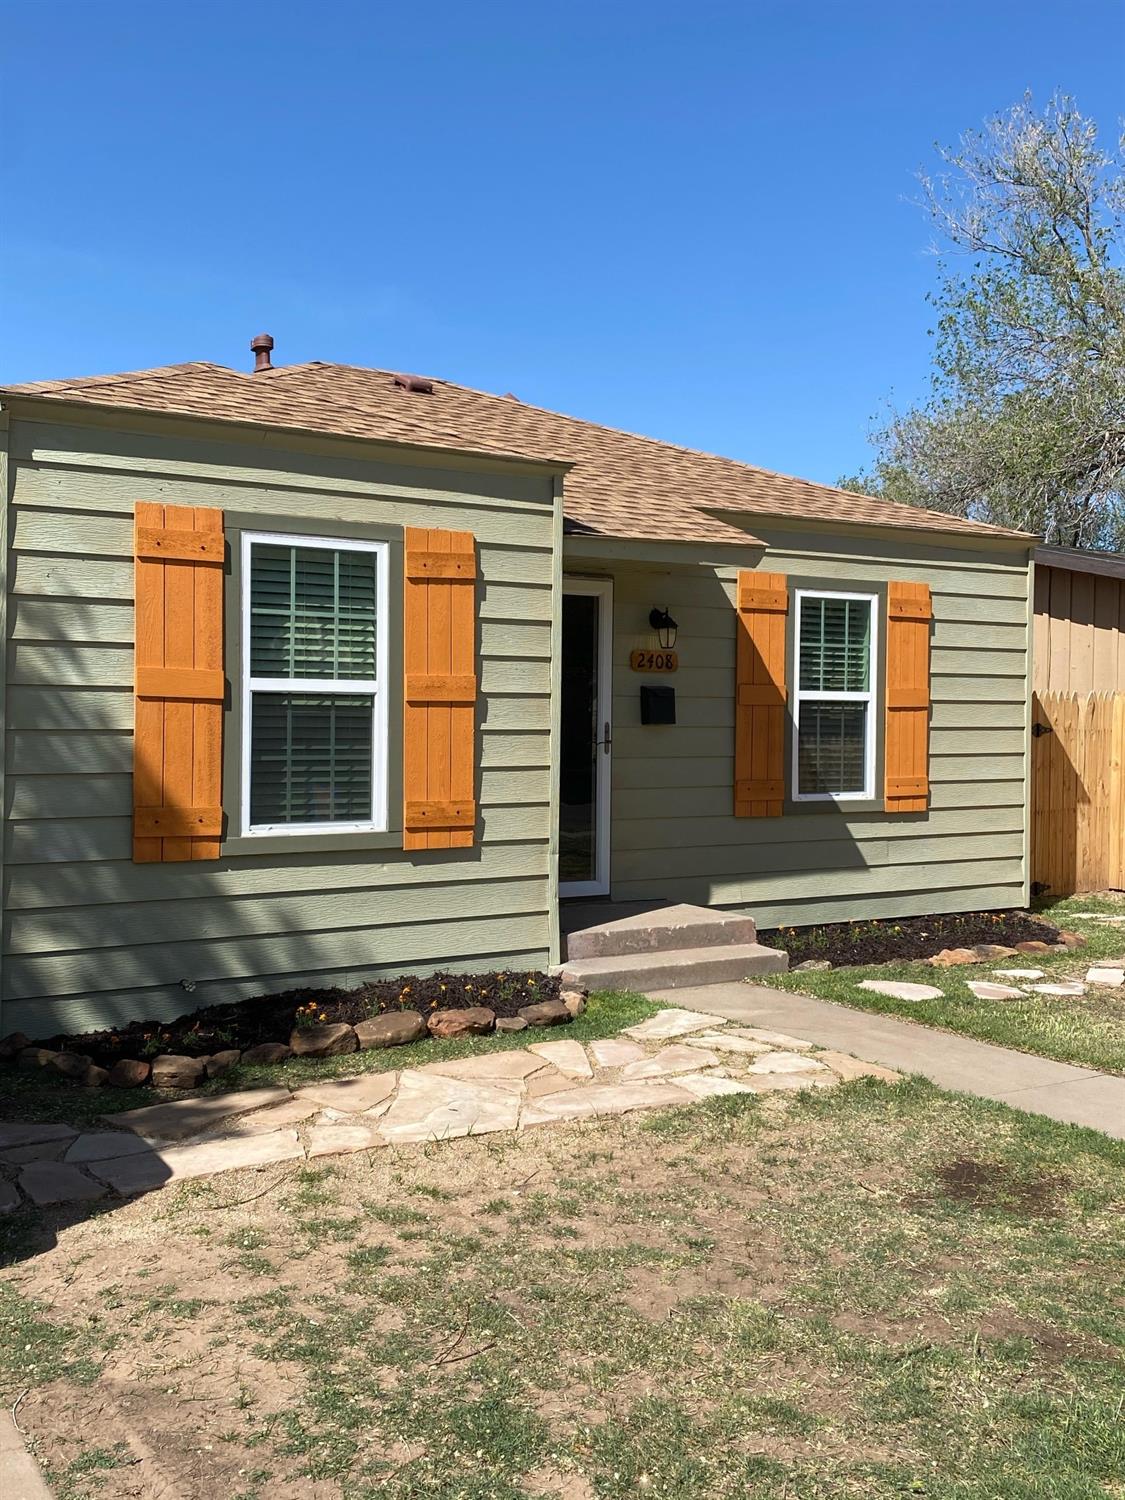 2408-24th has new paint on metal siding over the existing frame structure. All windows (15), exterior doors (3), and interior doors (13) are new! The interior has been updated! This home is quality built!